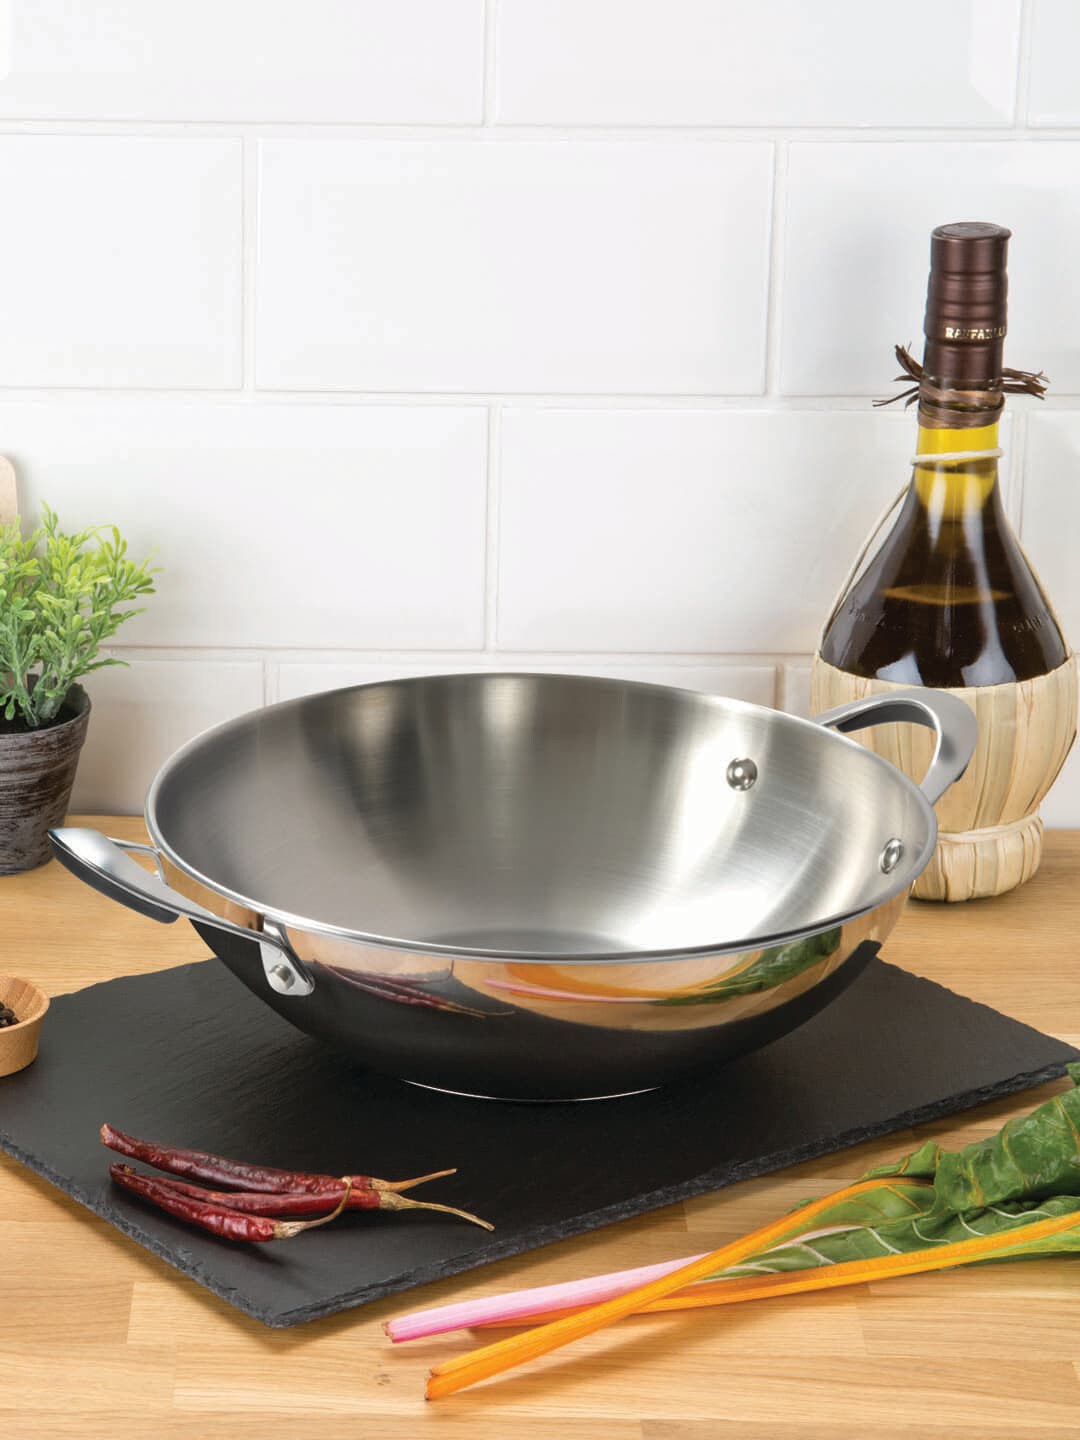 MEYER Silver Select Stainless Steel Kadai 22cm (Induction & Gas Compatible) Price in India